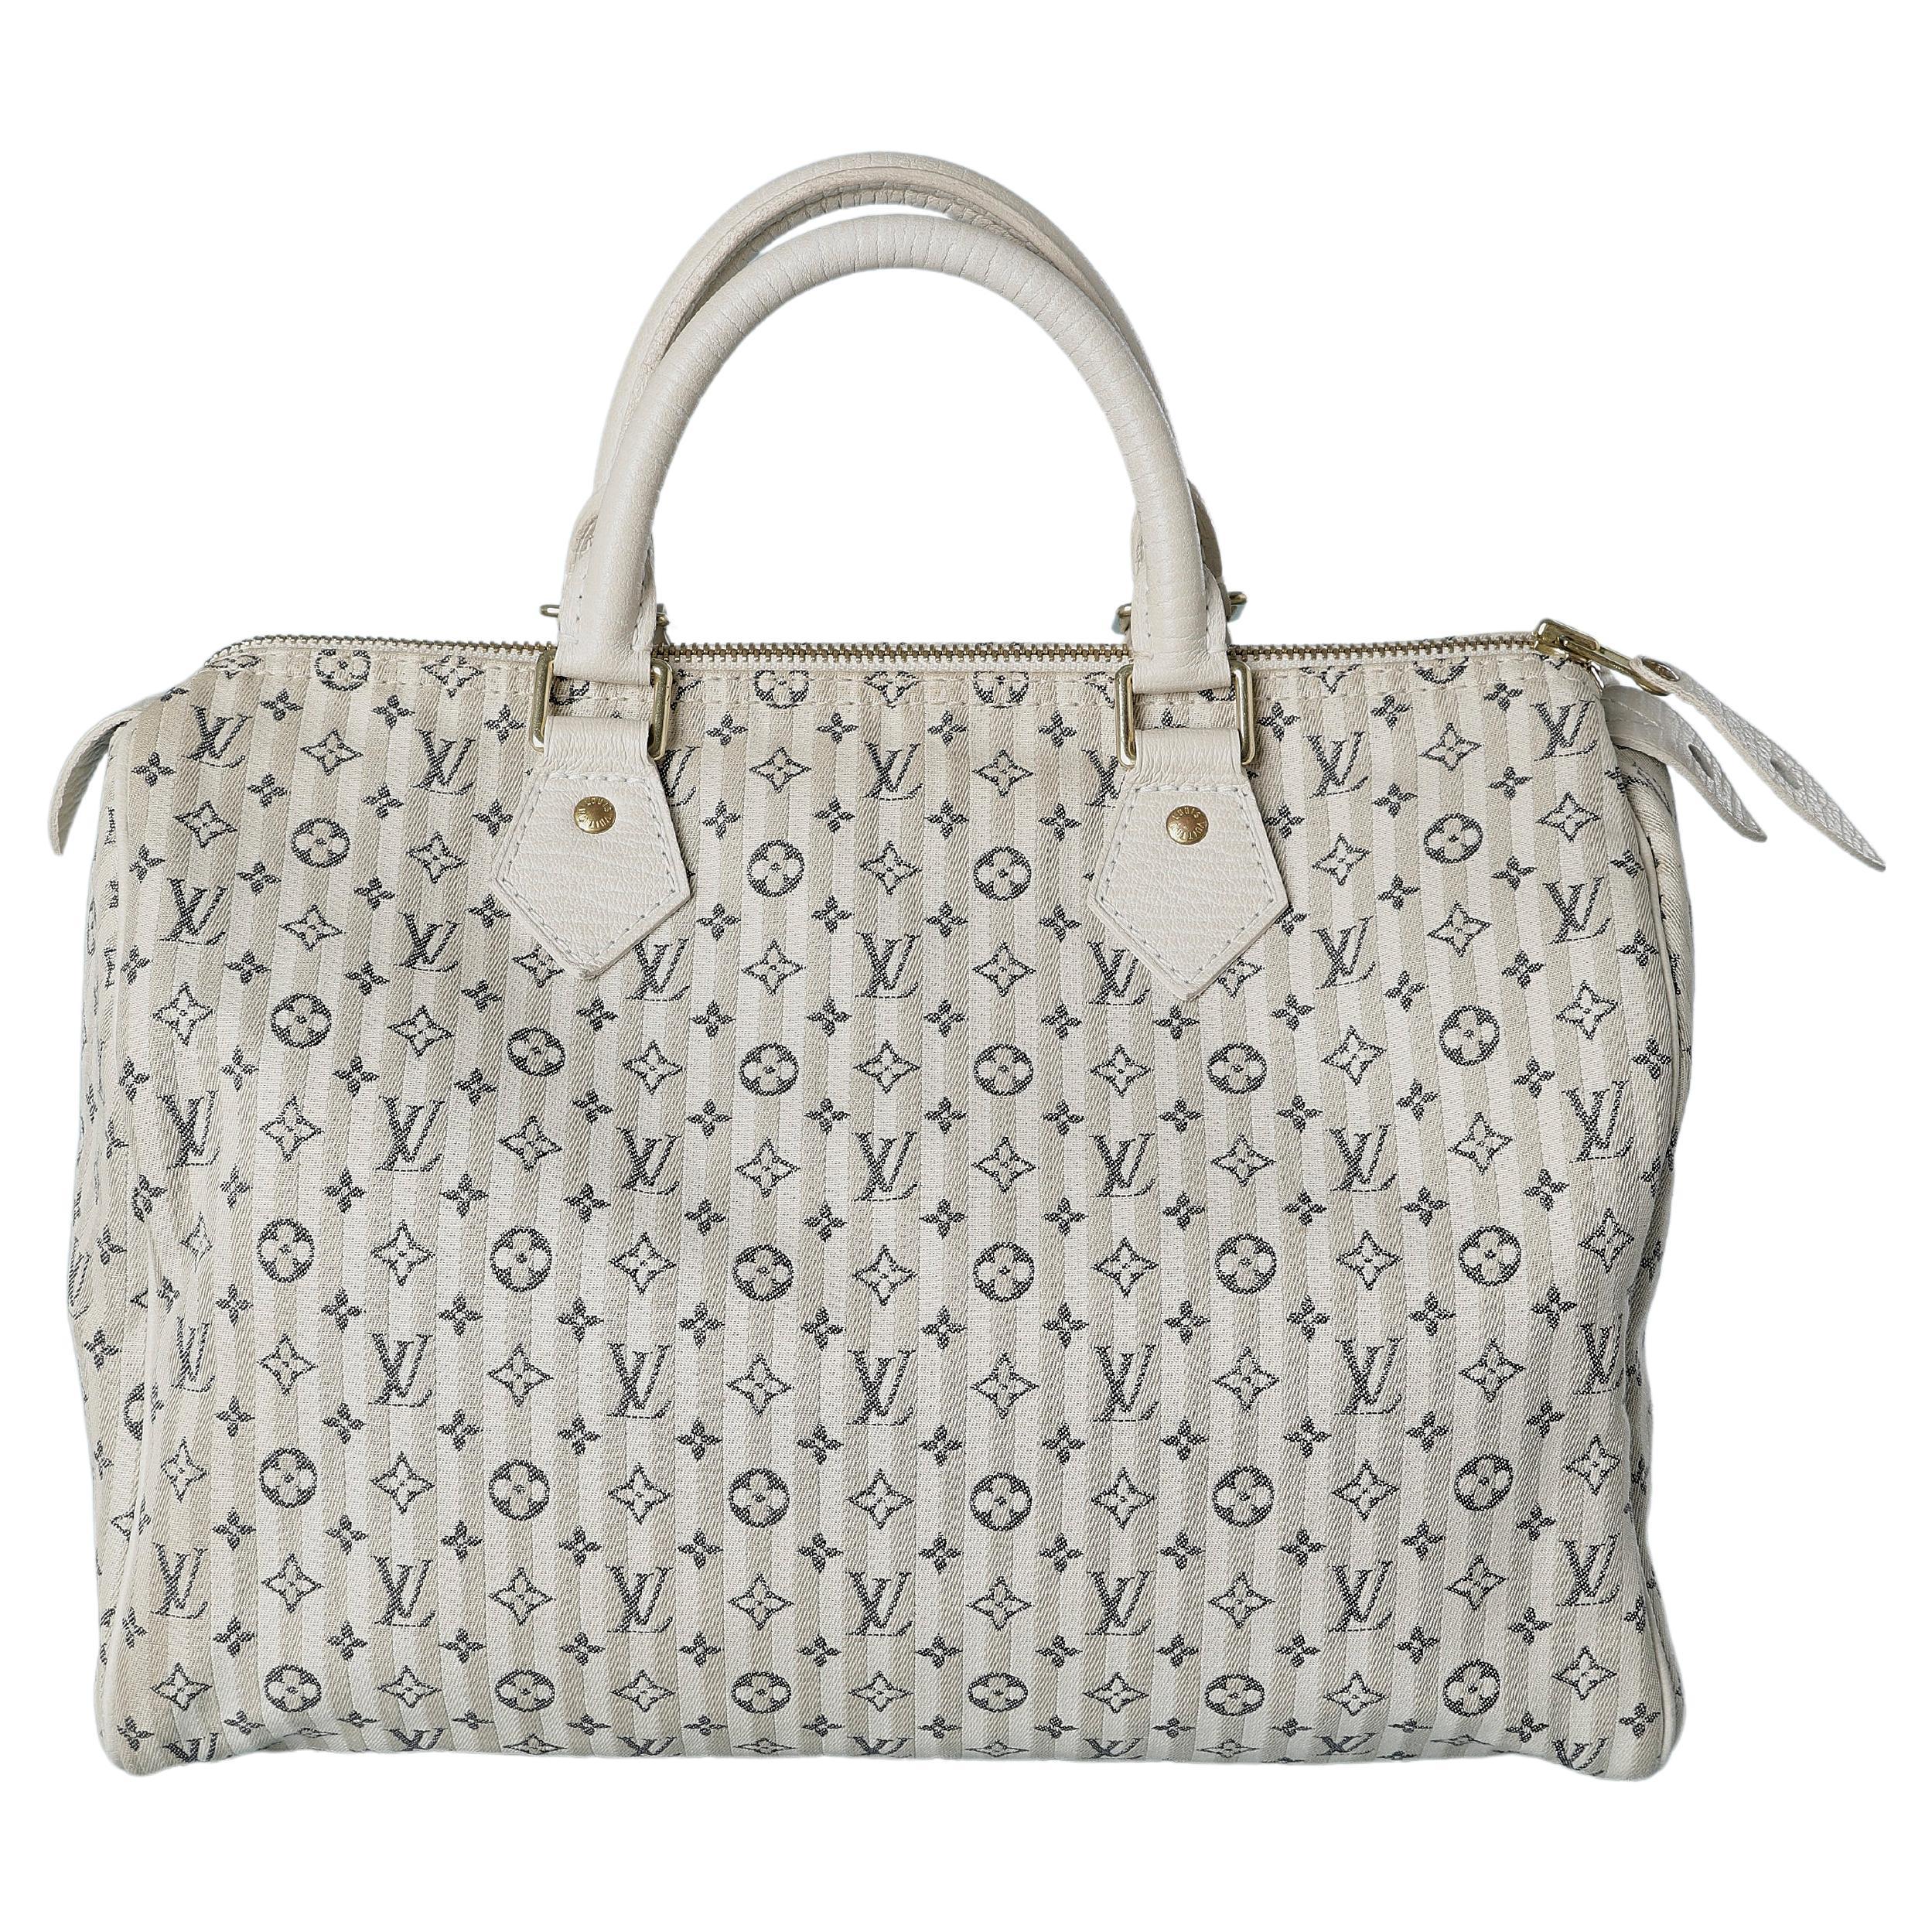 Off-white and beige Speedy hand-bag in cotton jacquard Louis Vuitton "Croisette" For Sale